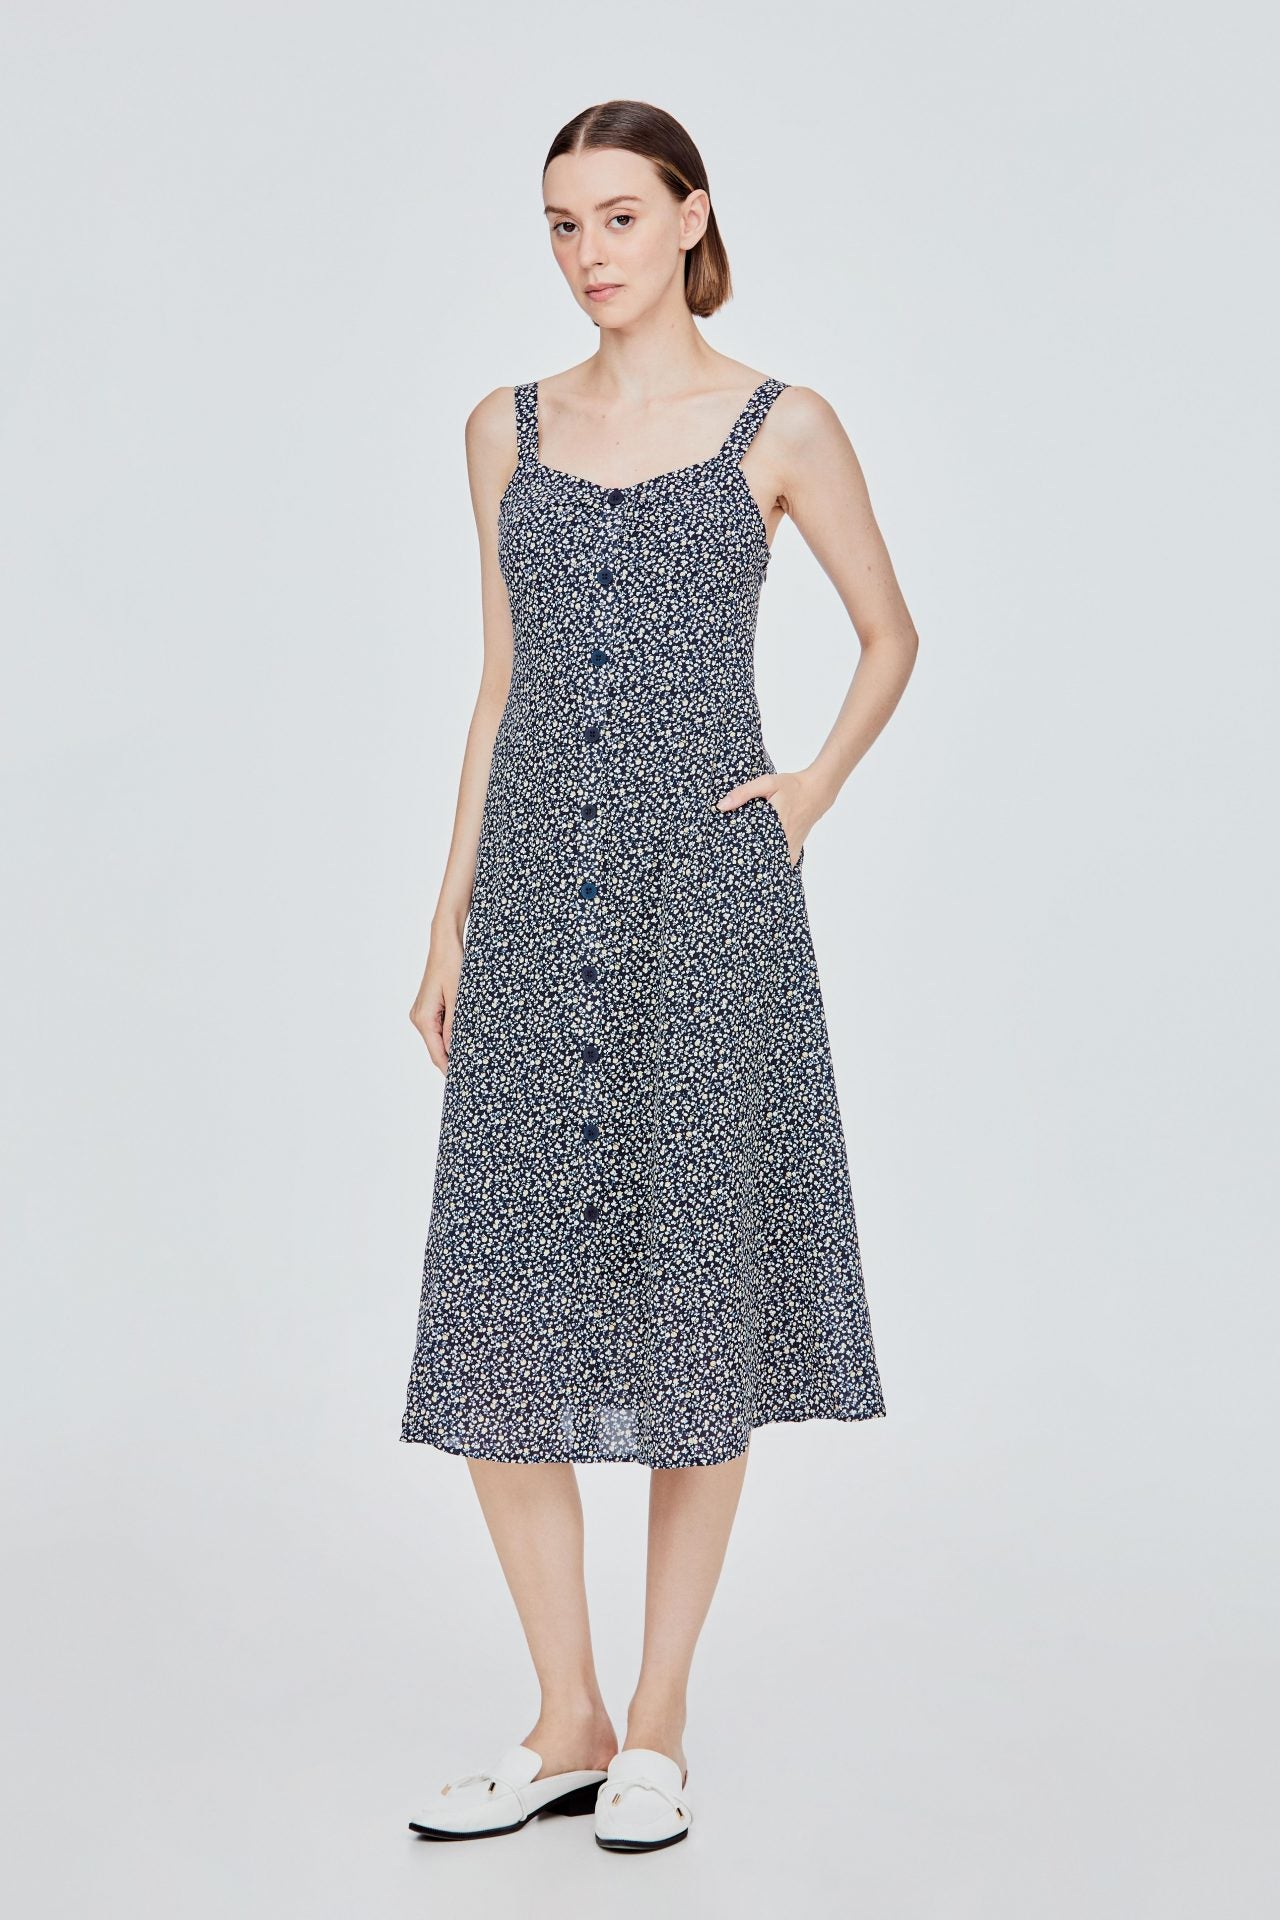 AD 11680 BUTTON DOWN SUNDRESS NAVY FLORAL